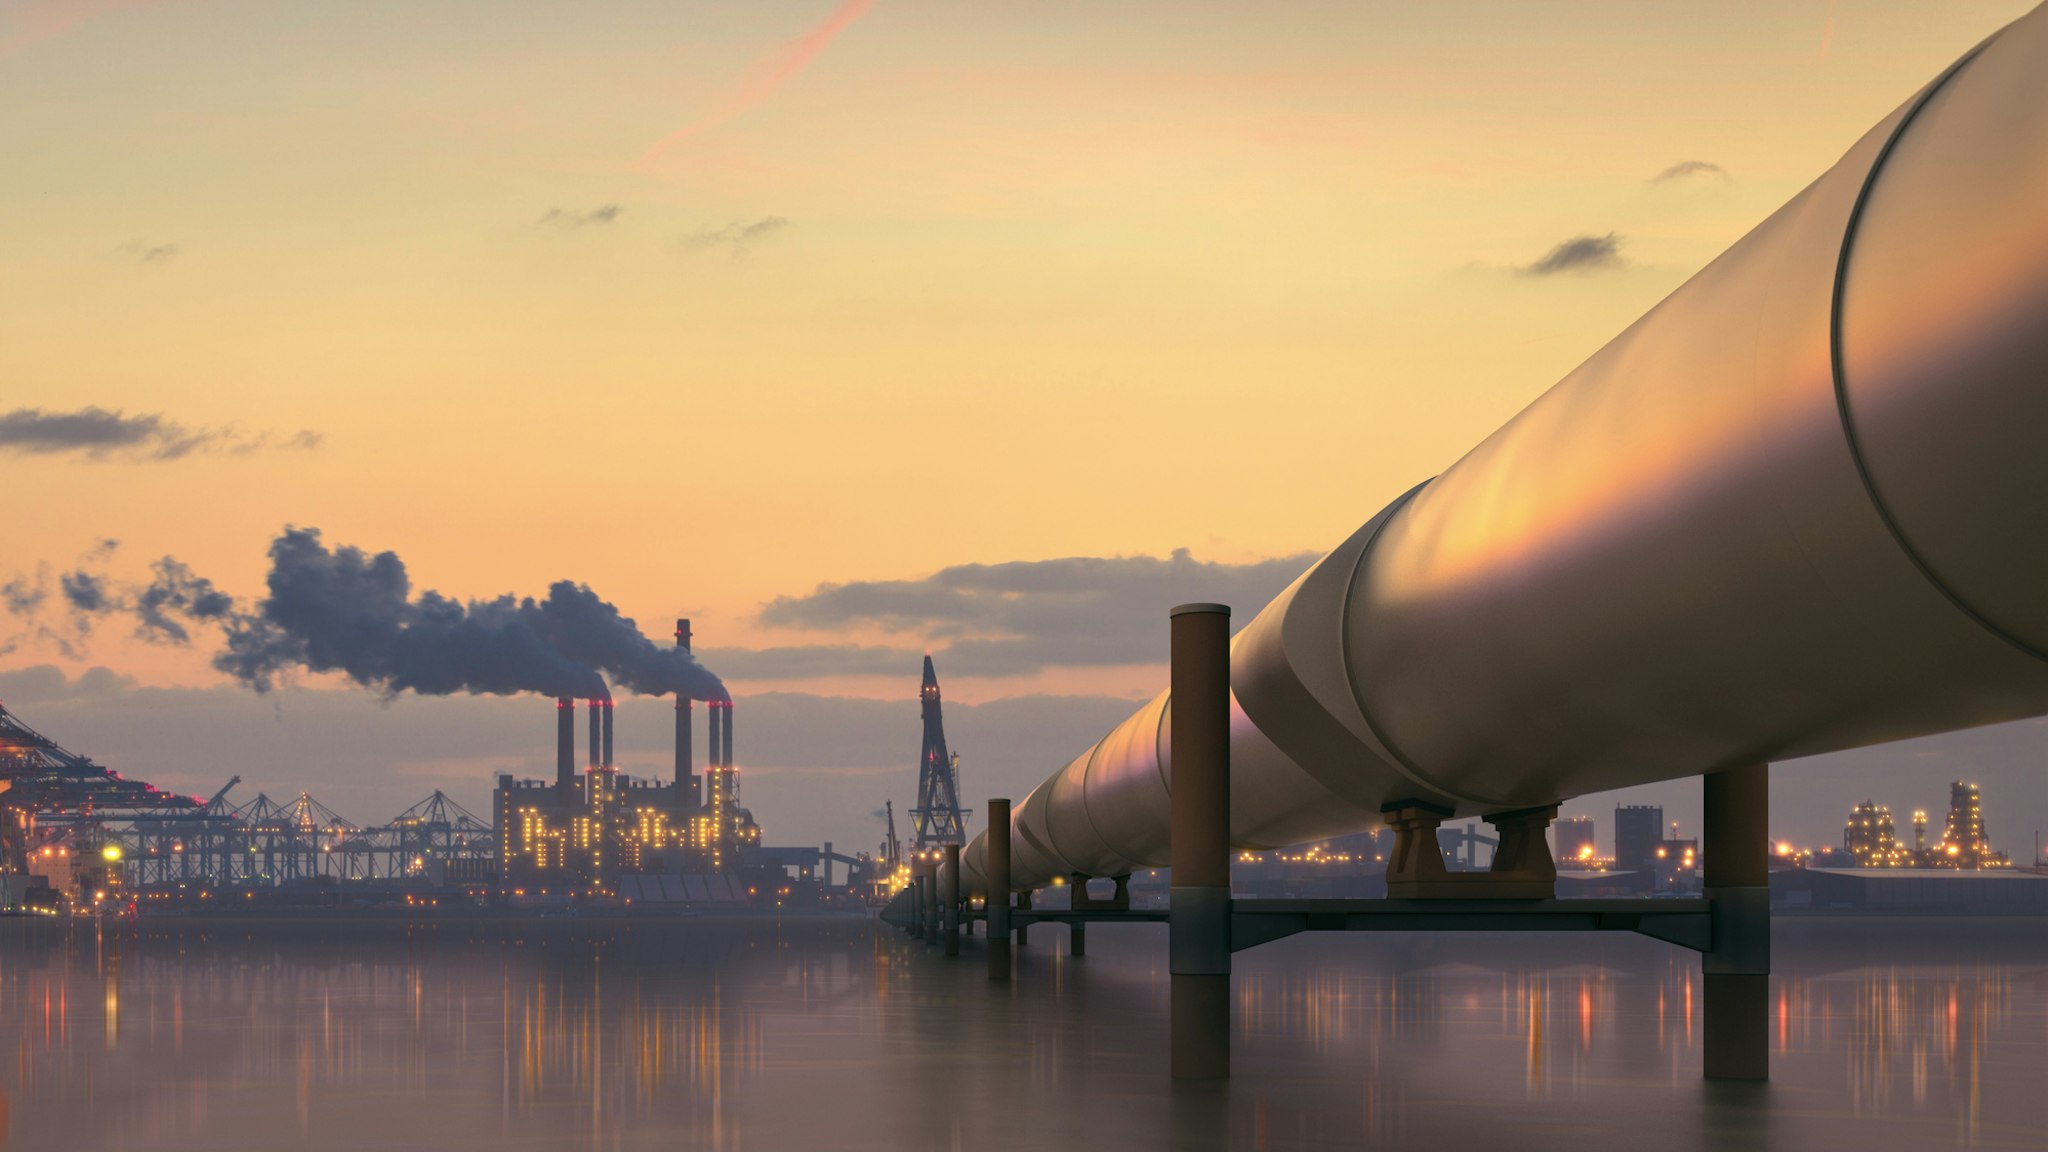 Oil pipeline in industrial district with factories at dusk - stock photo Pipeline in industrial district